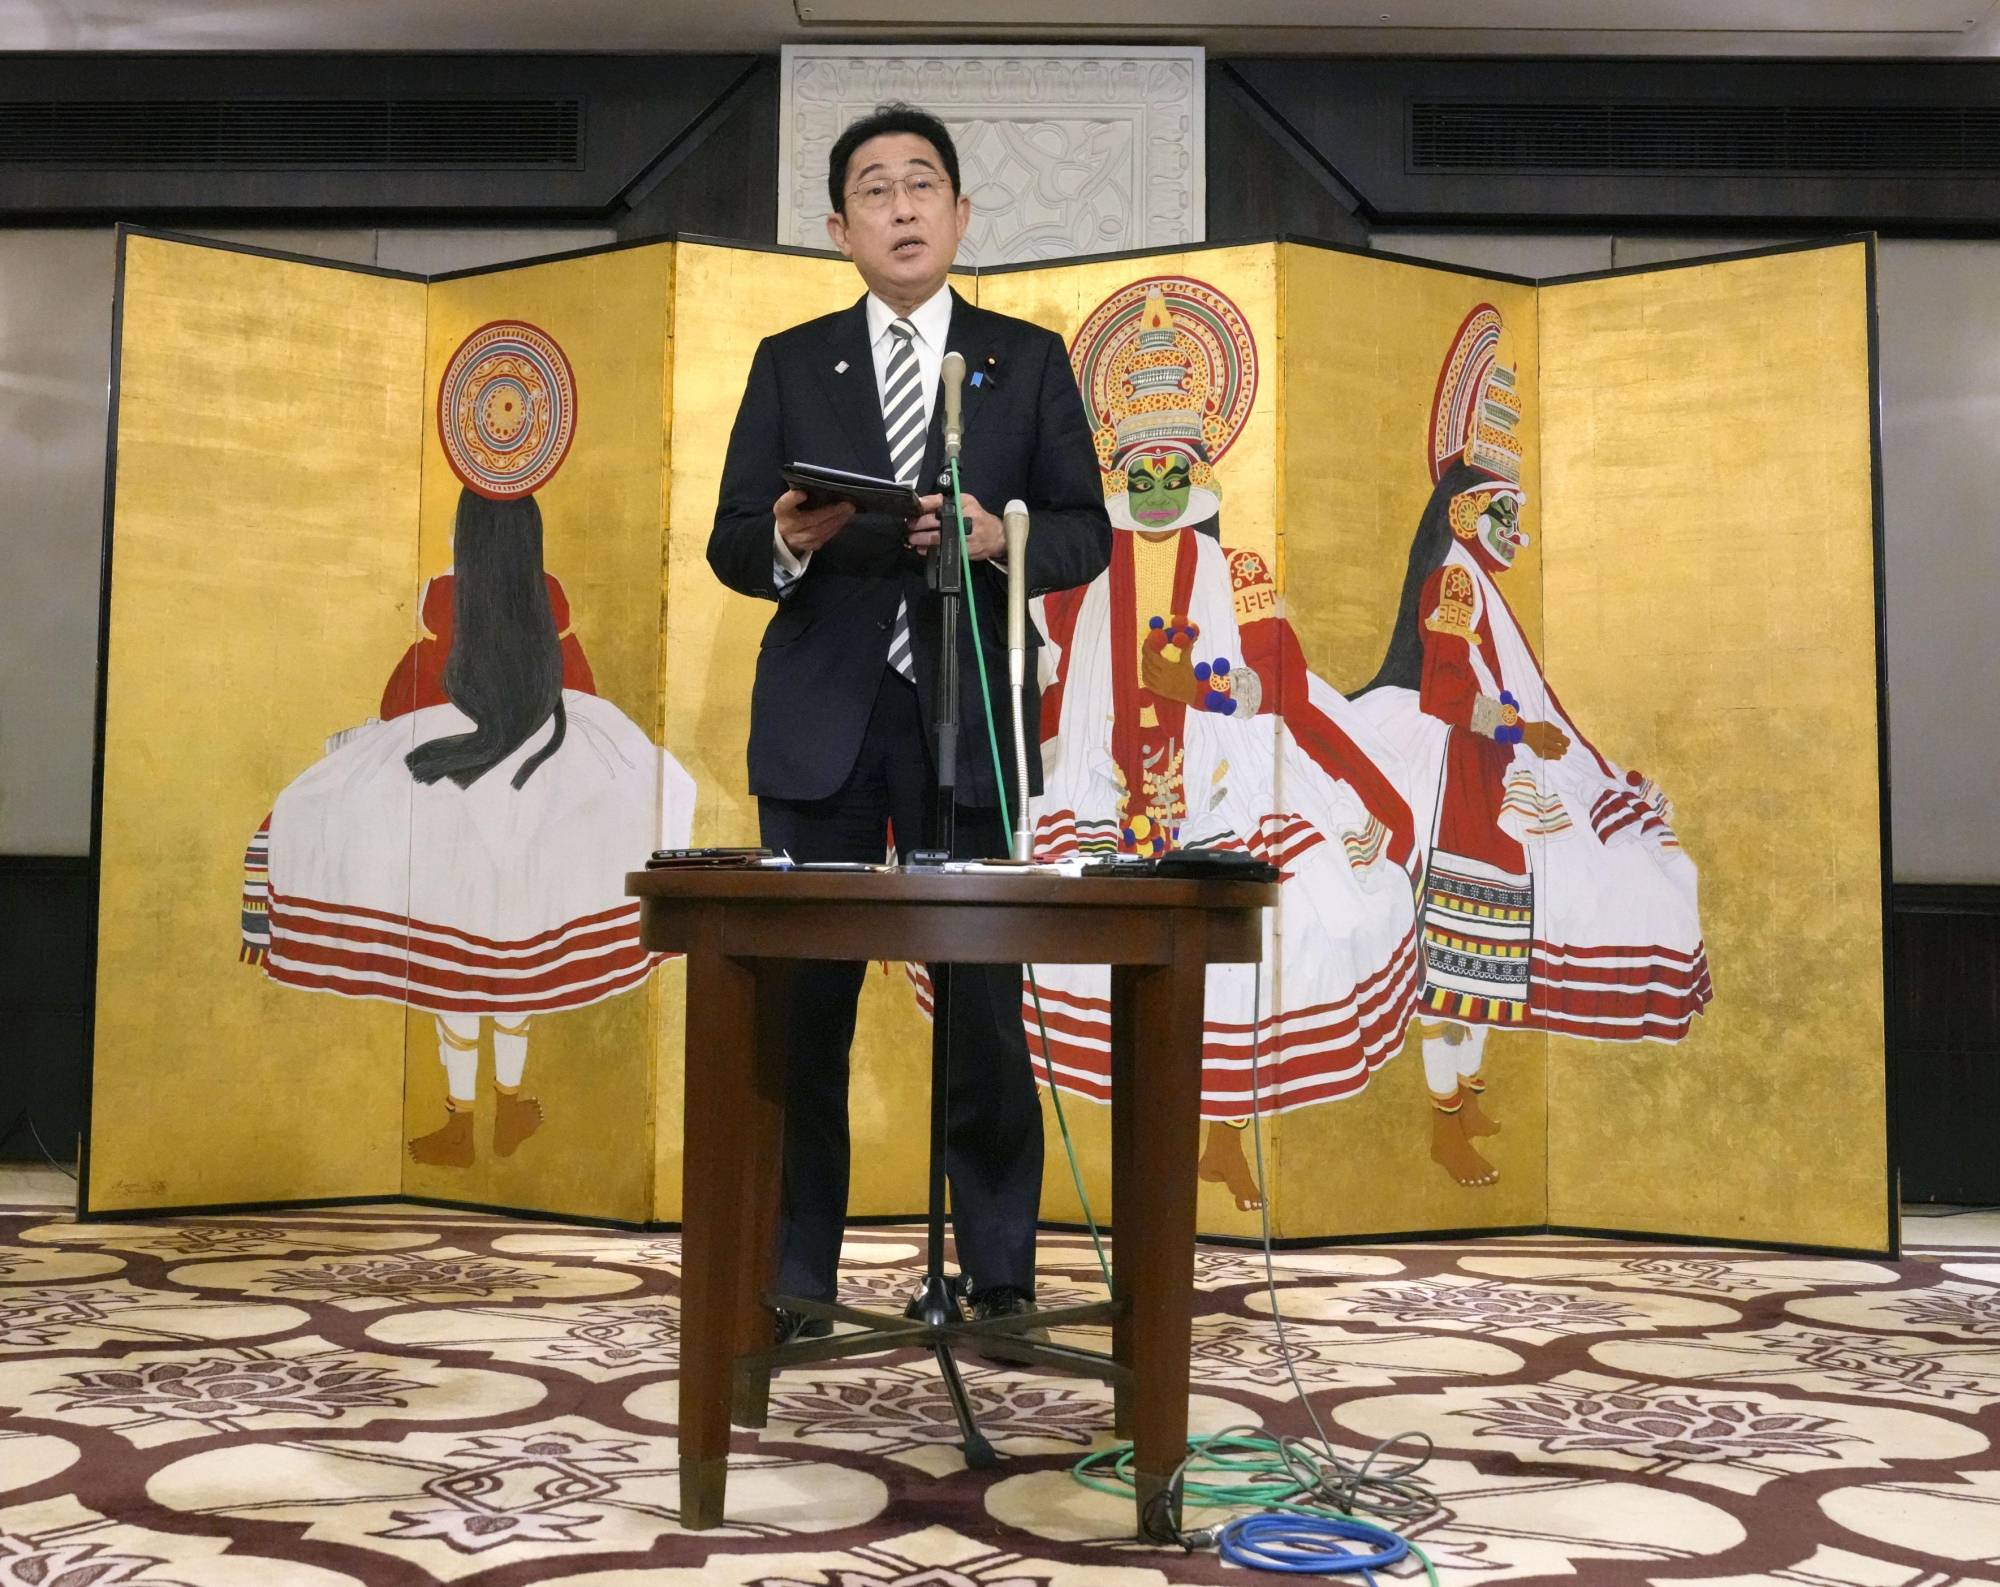 Prime Minister Fumio Kishida speaks to reporters in New Delhi on Monday after holding talks with Indian leader Narendra Modi. | KYODO